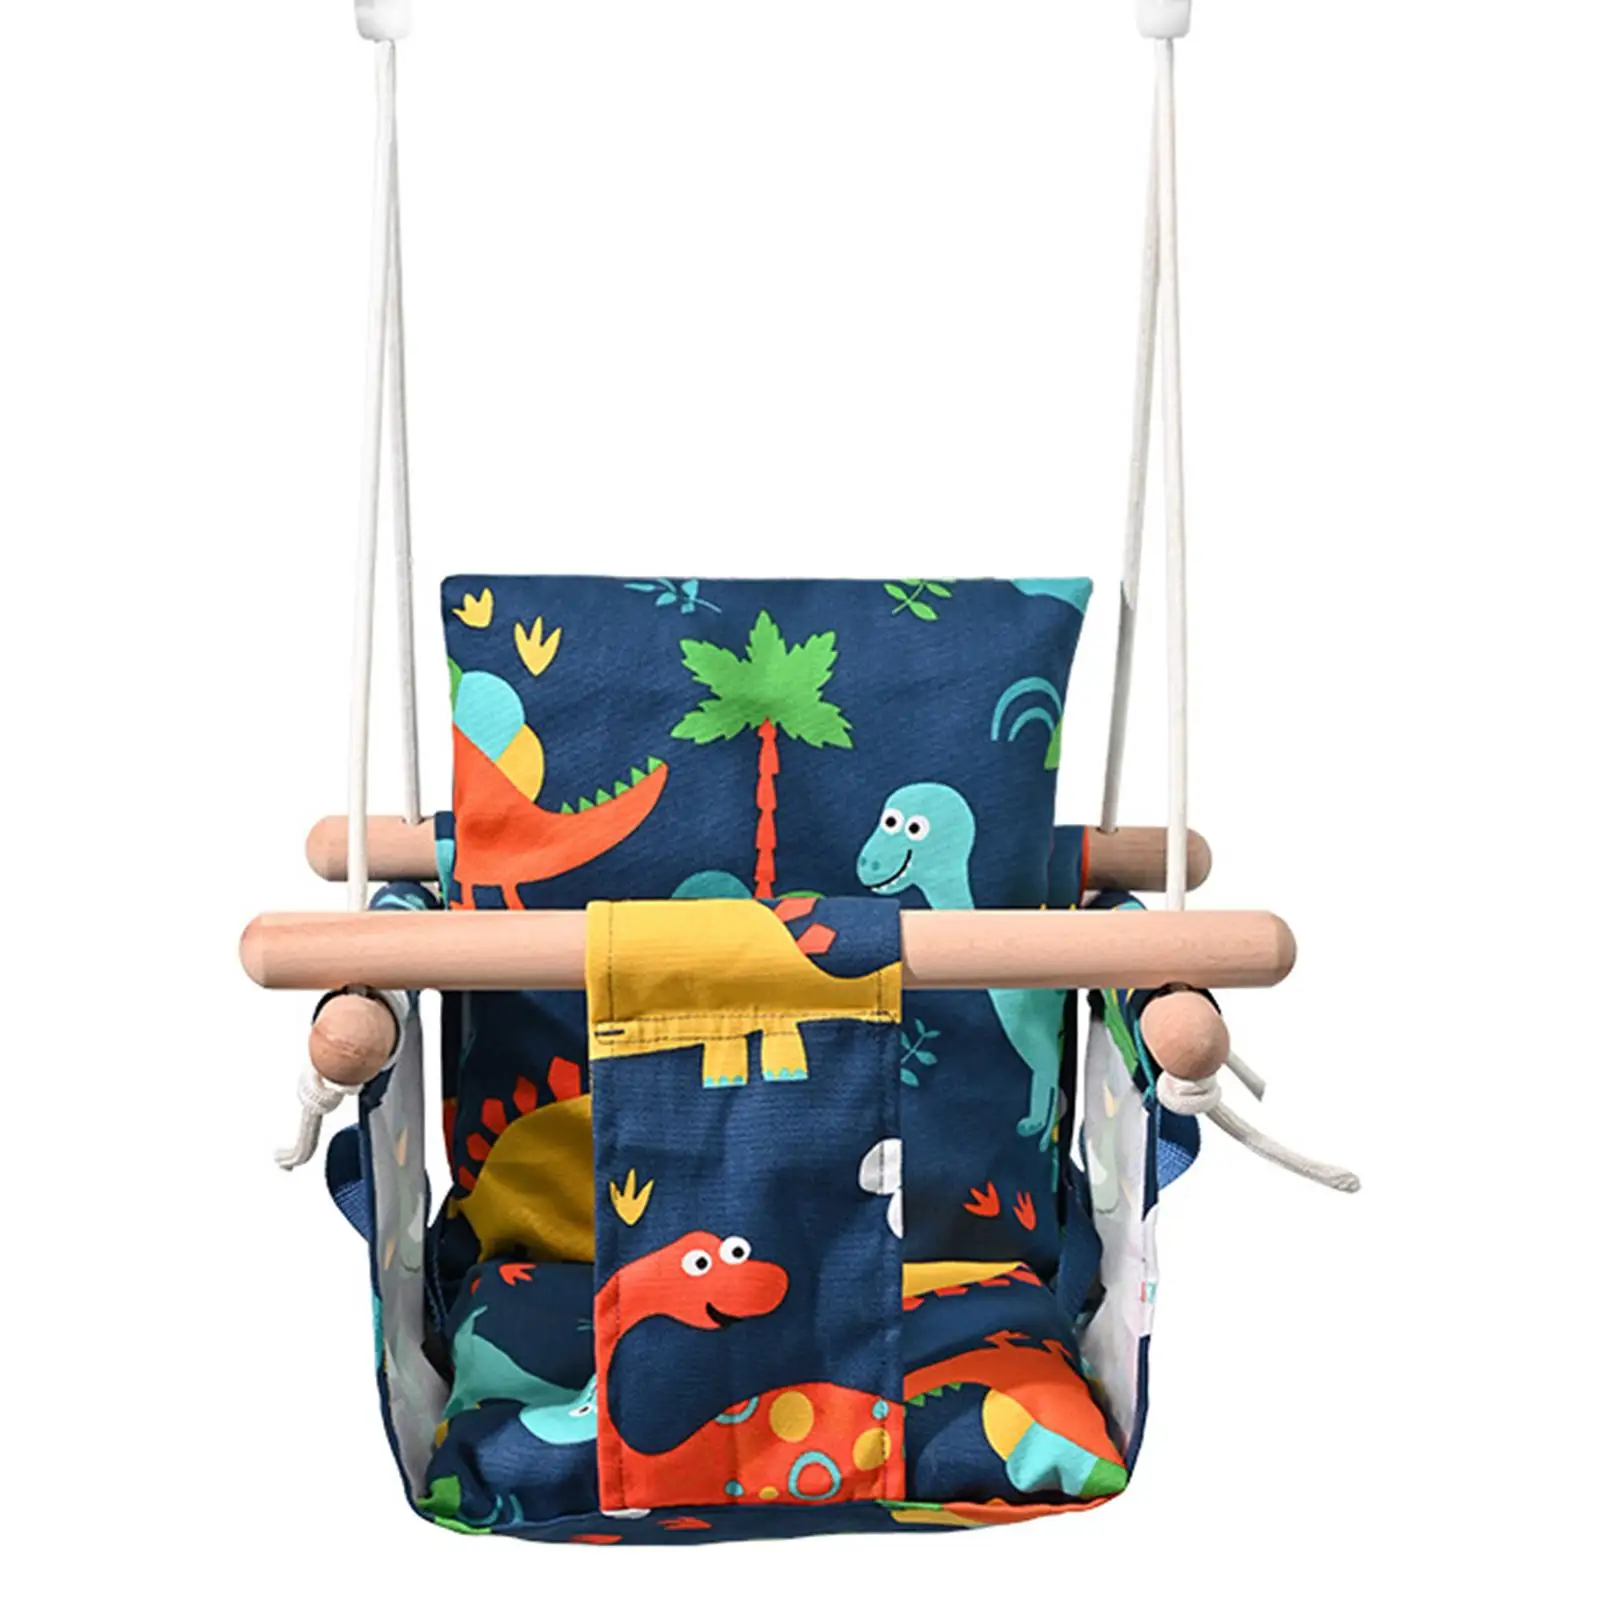 Baby Hanging Swing Seat Ajustable Rope Swinging Rocking Chair for Camping